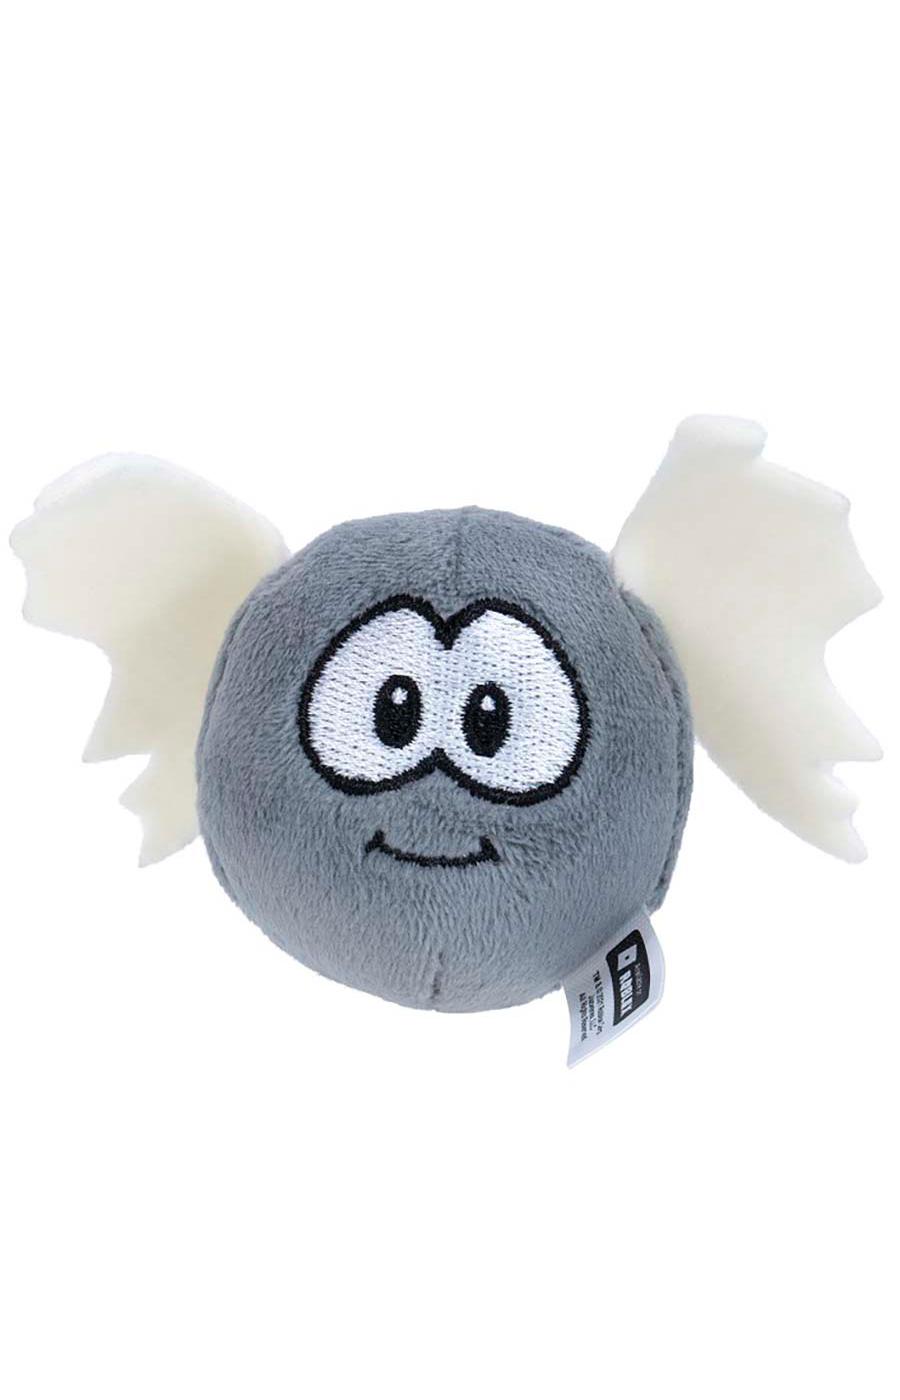 Meep City Micro Plush Mystery, available on Roblox; image 9 of 13